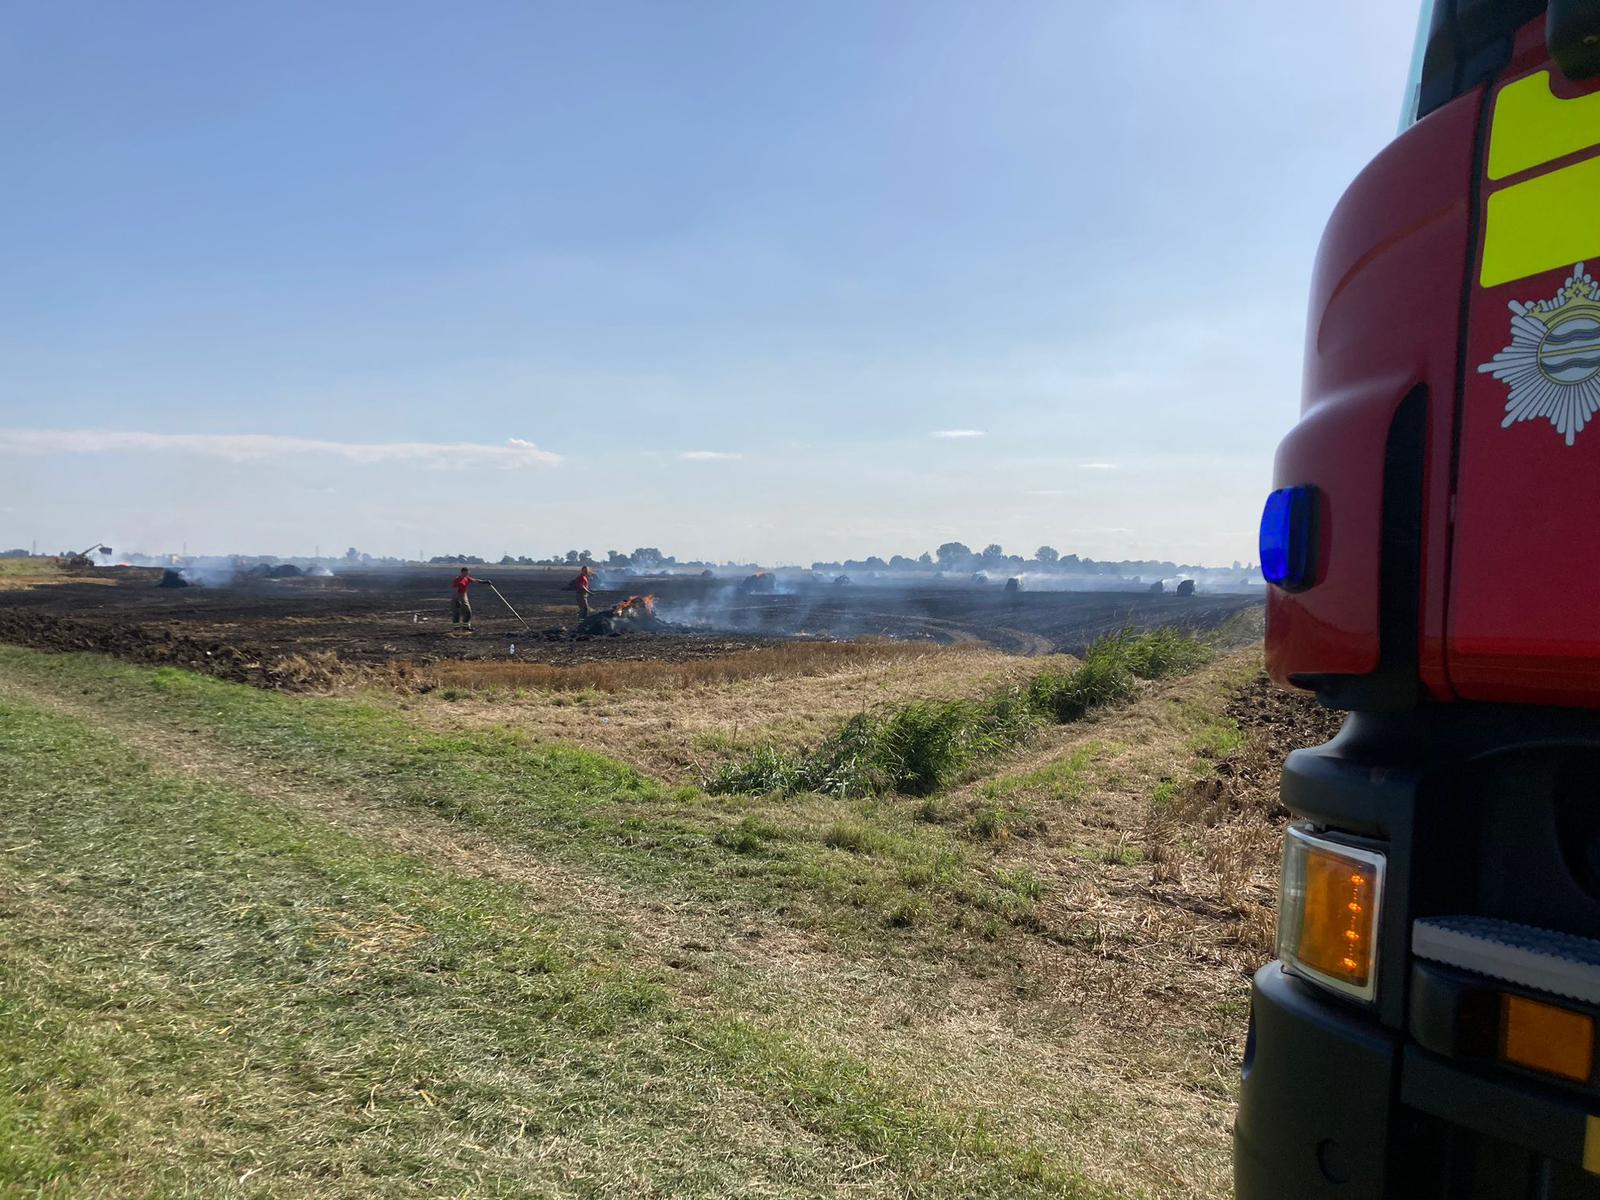 Firefighters tackling a fire in a field.